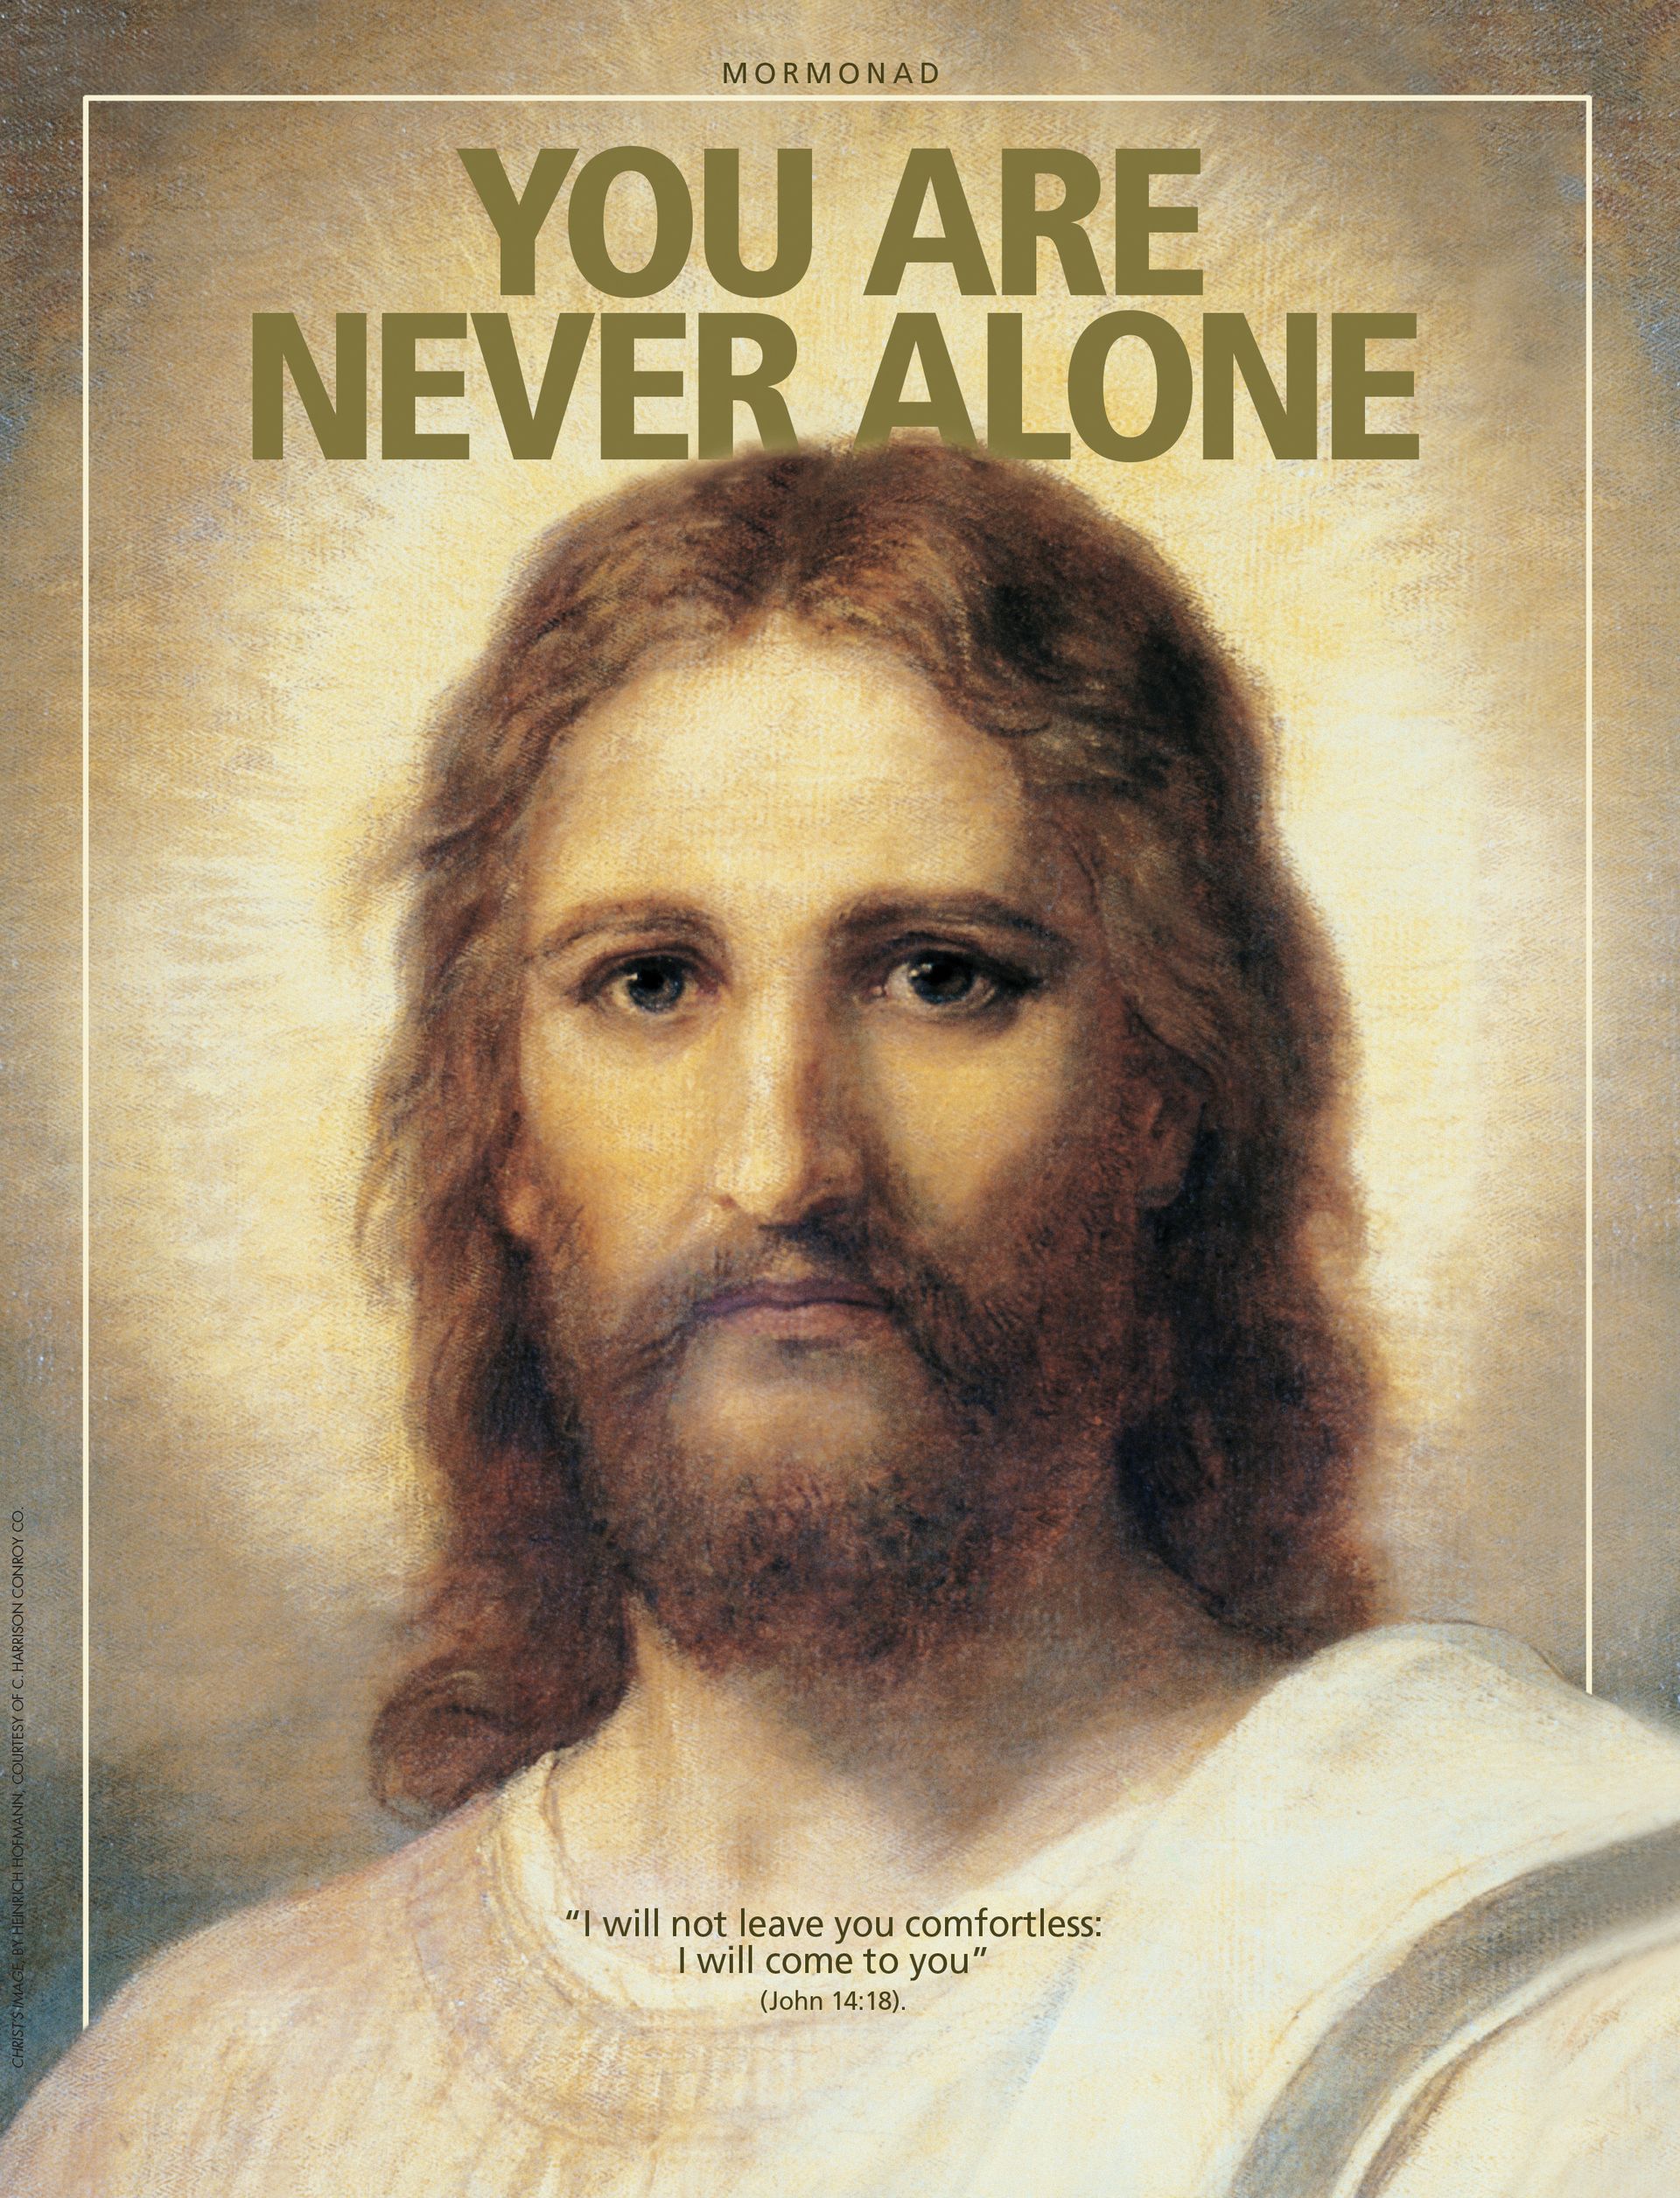 You Are Never Alone. “I will not leave you comfortless: I will come to you” (John 14:18). Dec. 2011 © undefined ipCode 1.